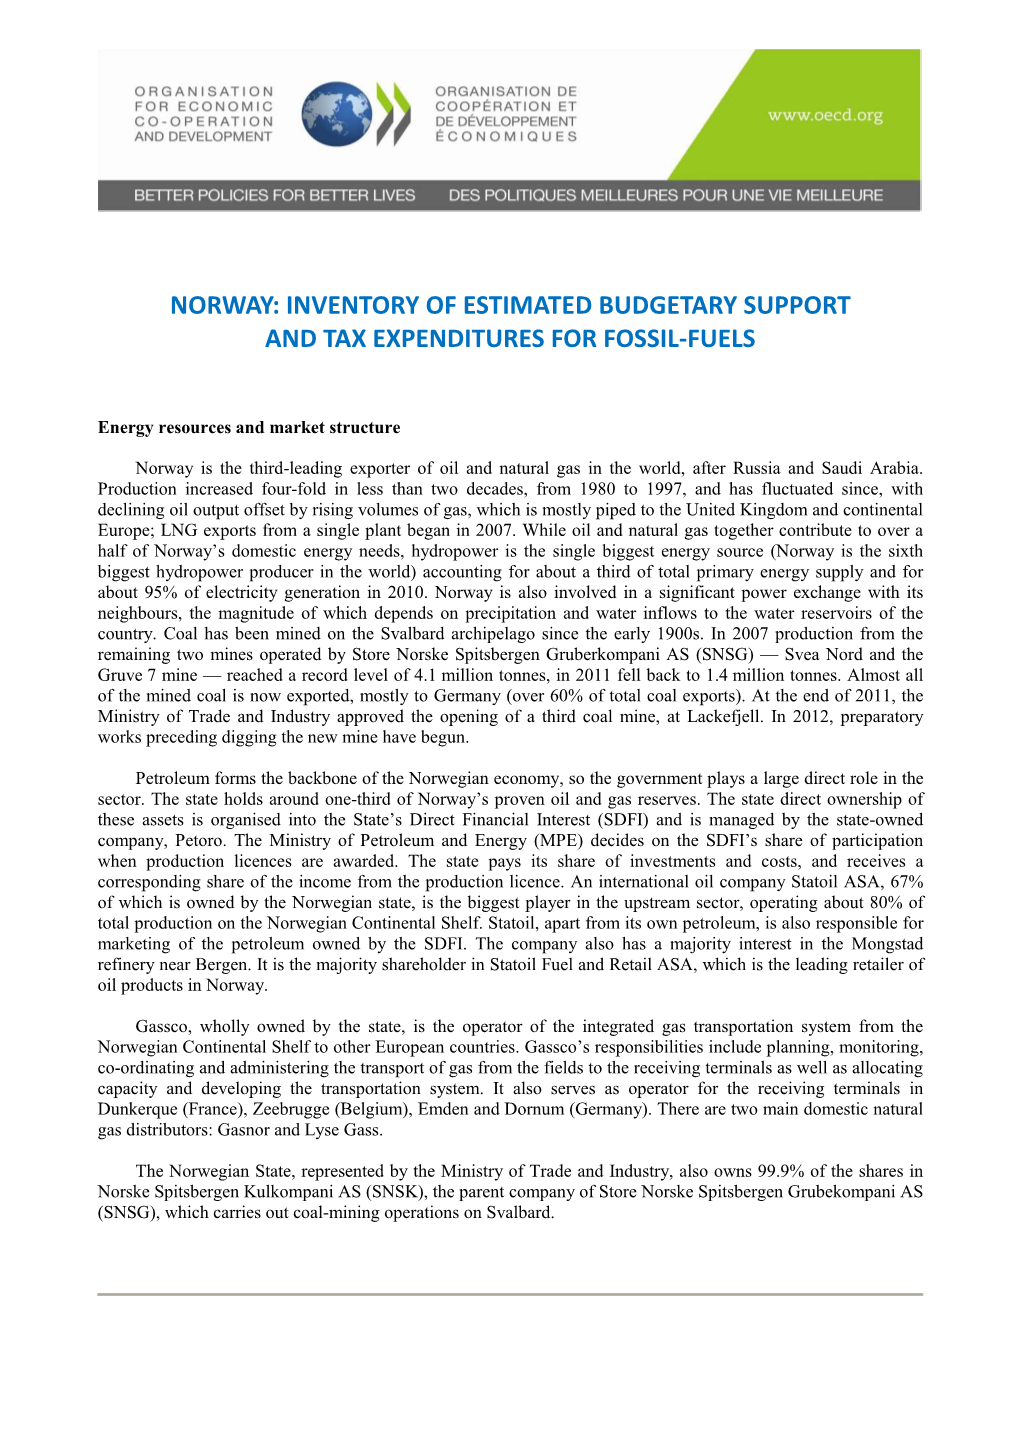 Norway: Inventory of Estimated Budgetary Support and Tax Expenditures for Fossil-Fuels